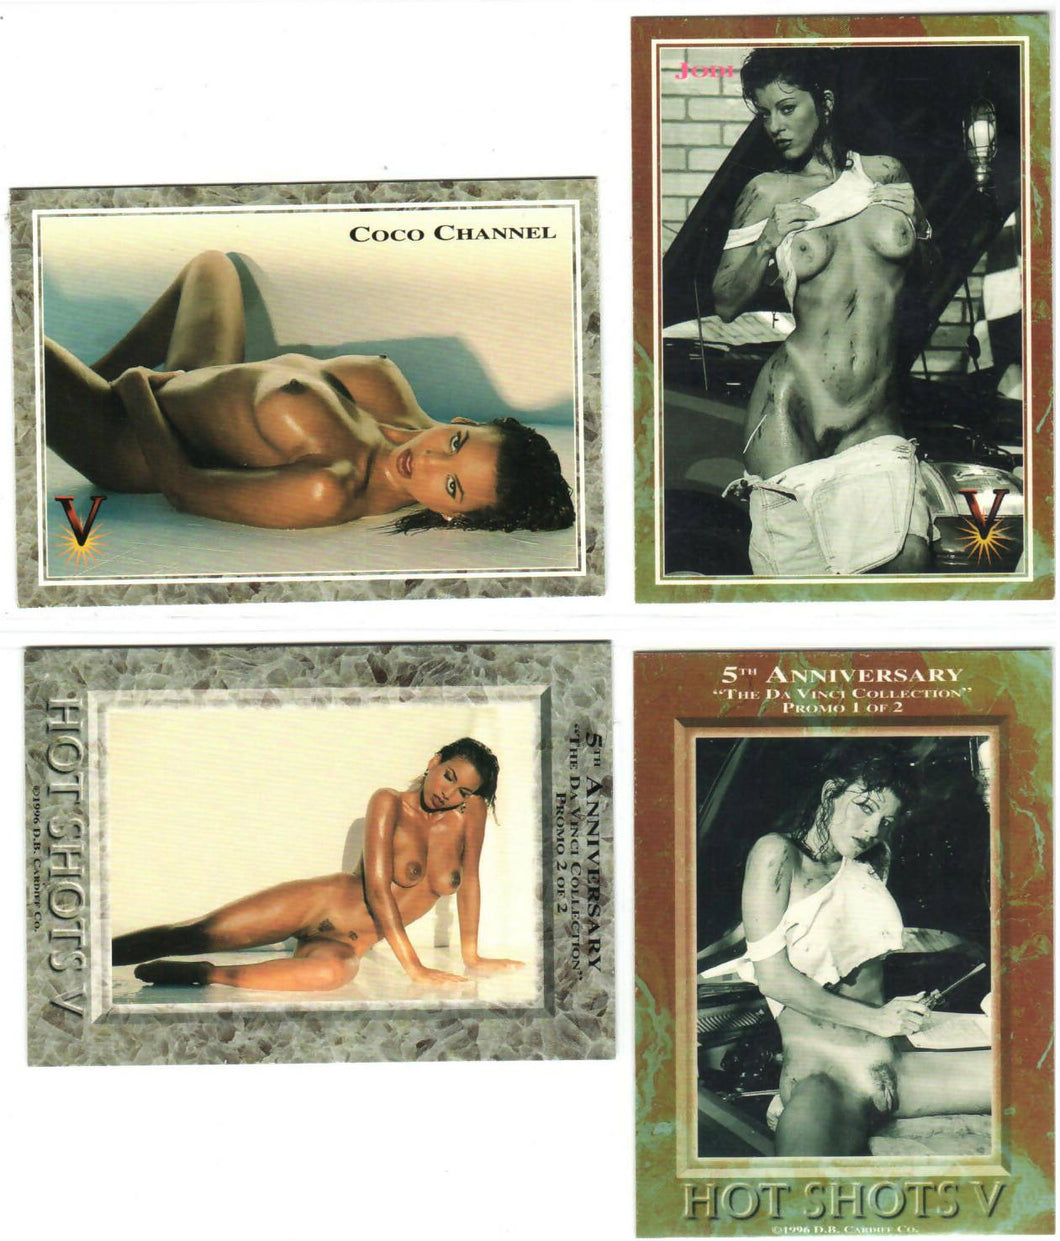 Hot Shots - series 5 - Promo subset (2 cards) Jodi & Coco Channel